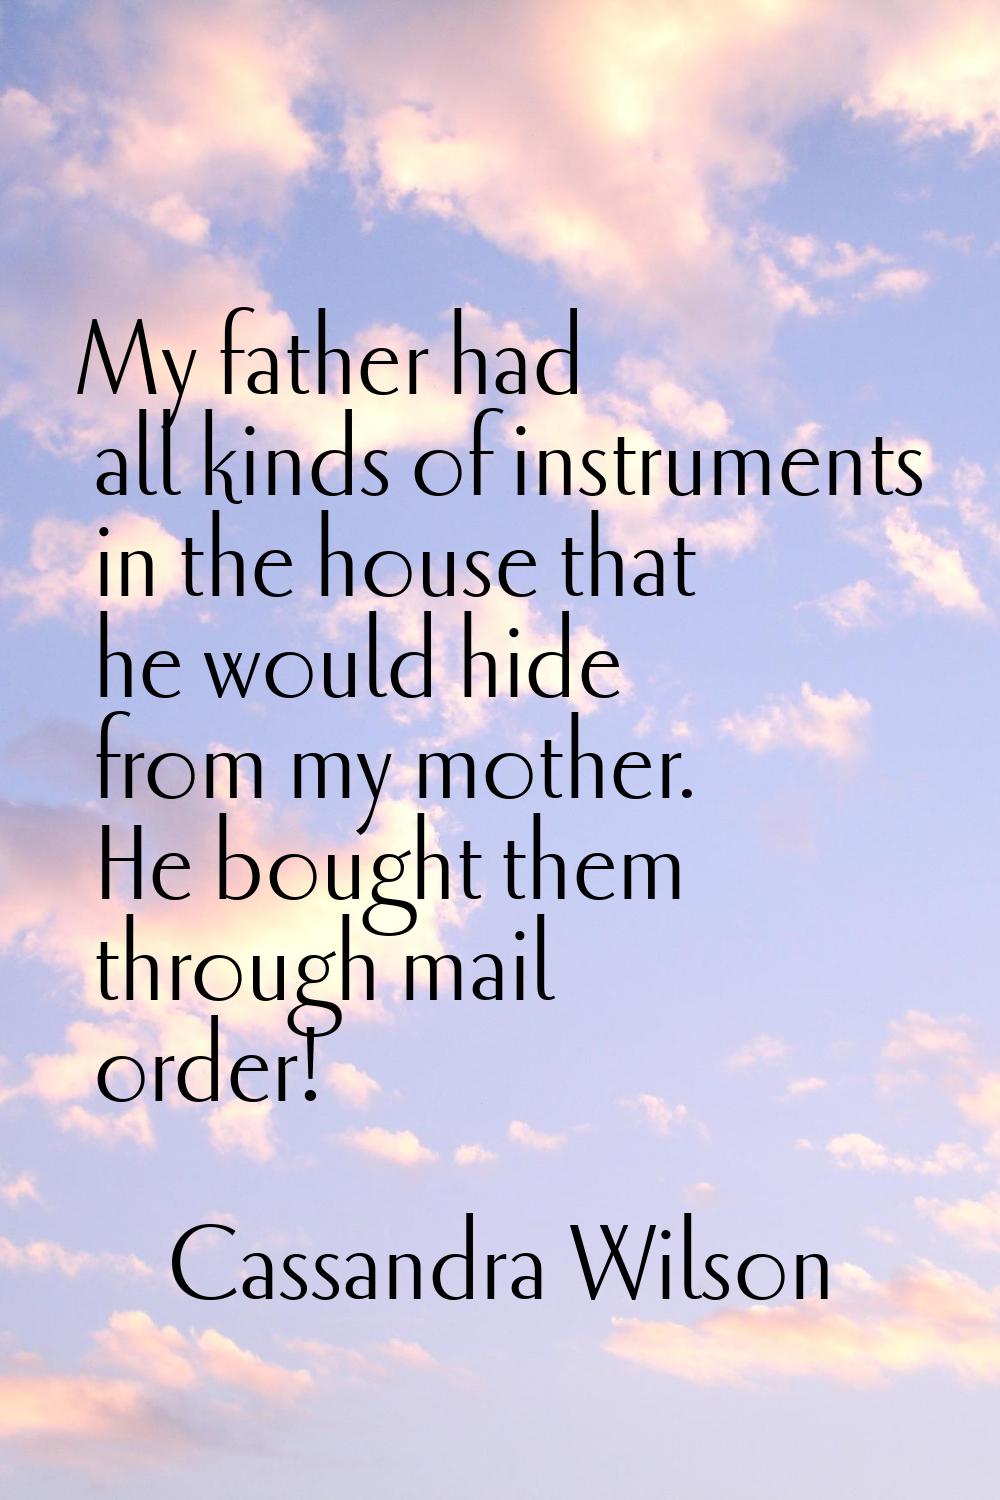 My father had all kinds of instruments in the house that he would hide from my mother. He bought th